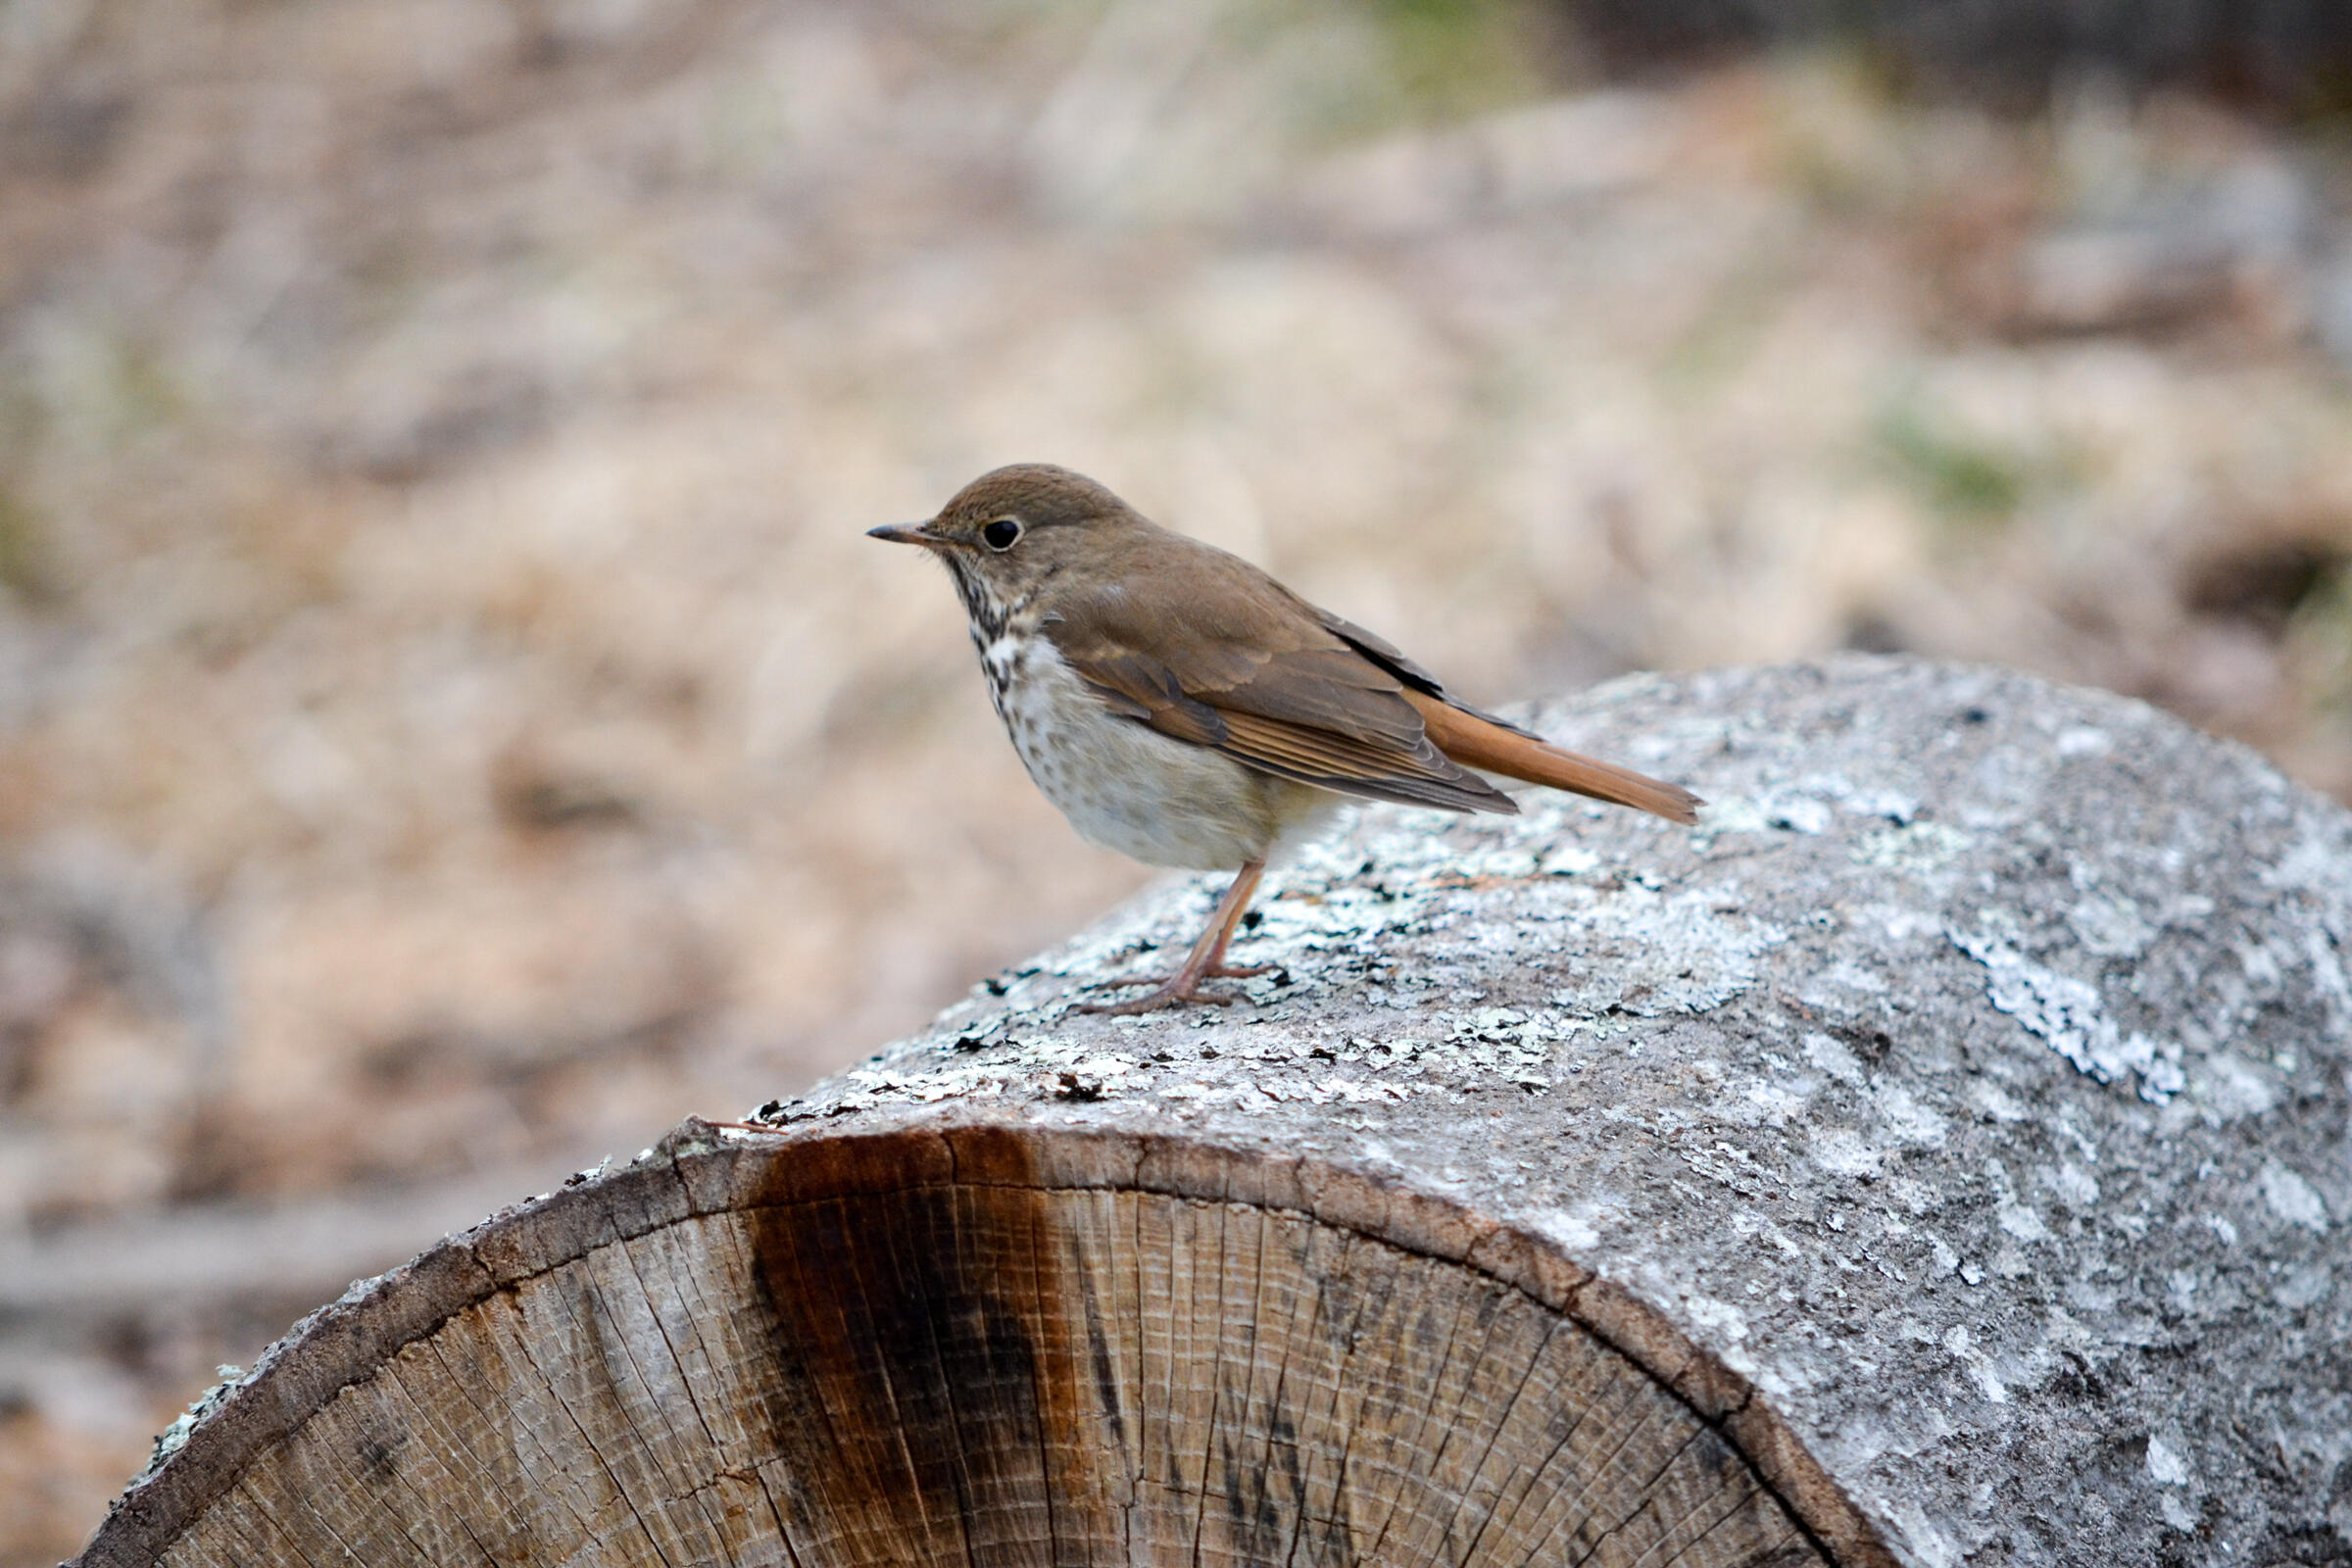 A Hermit Thrush, a brown with with a white chest with speckled dots, and a reddish brown tail, sits on top of a cut log.